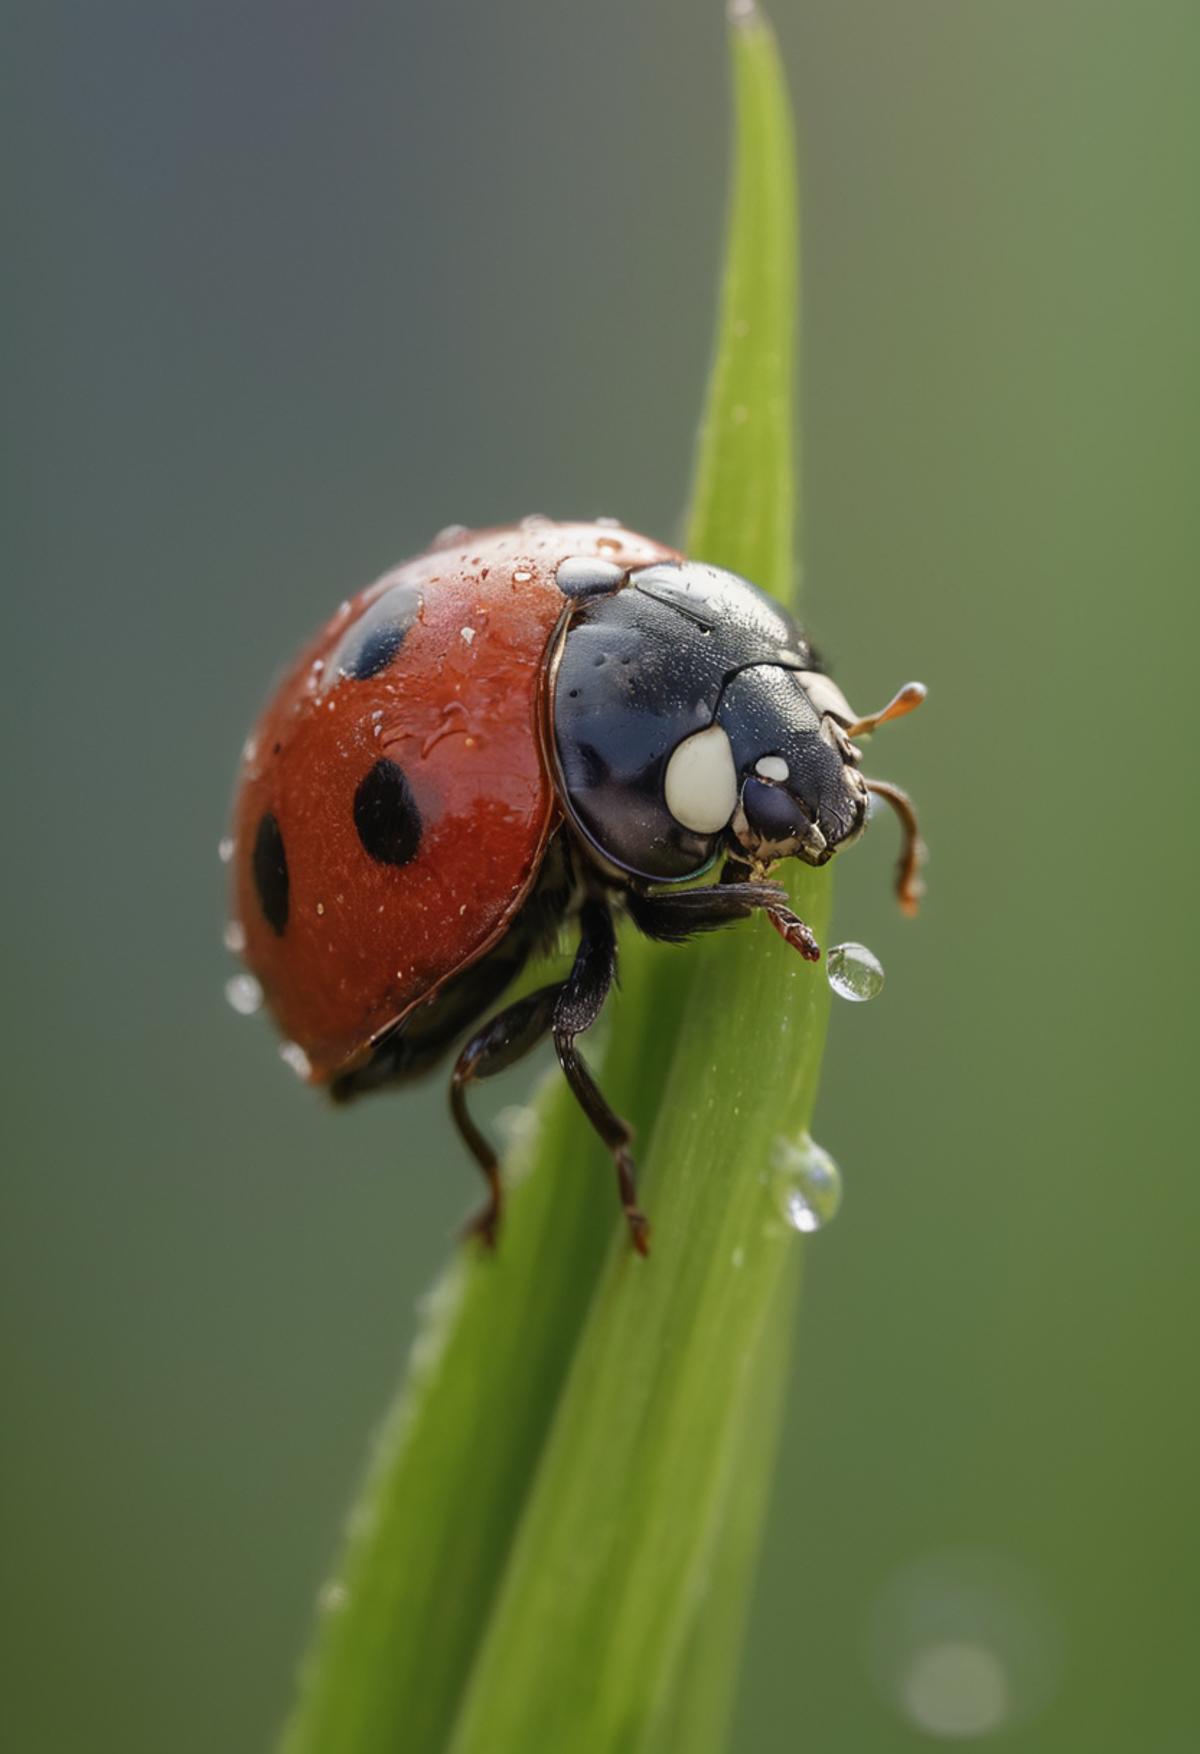 A Ladybug Standing on a Plant and Looking Upwards.